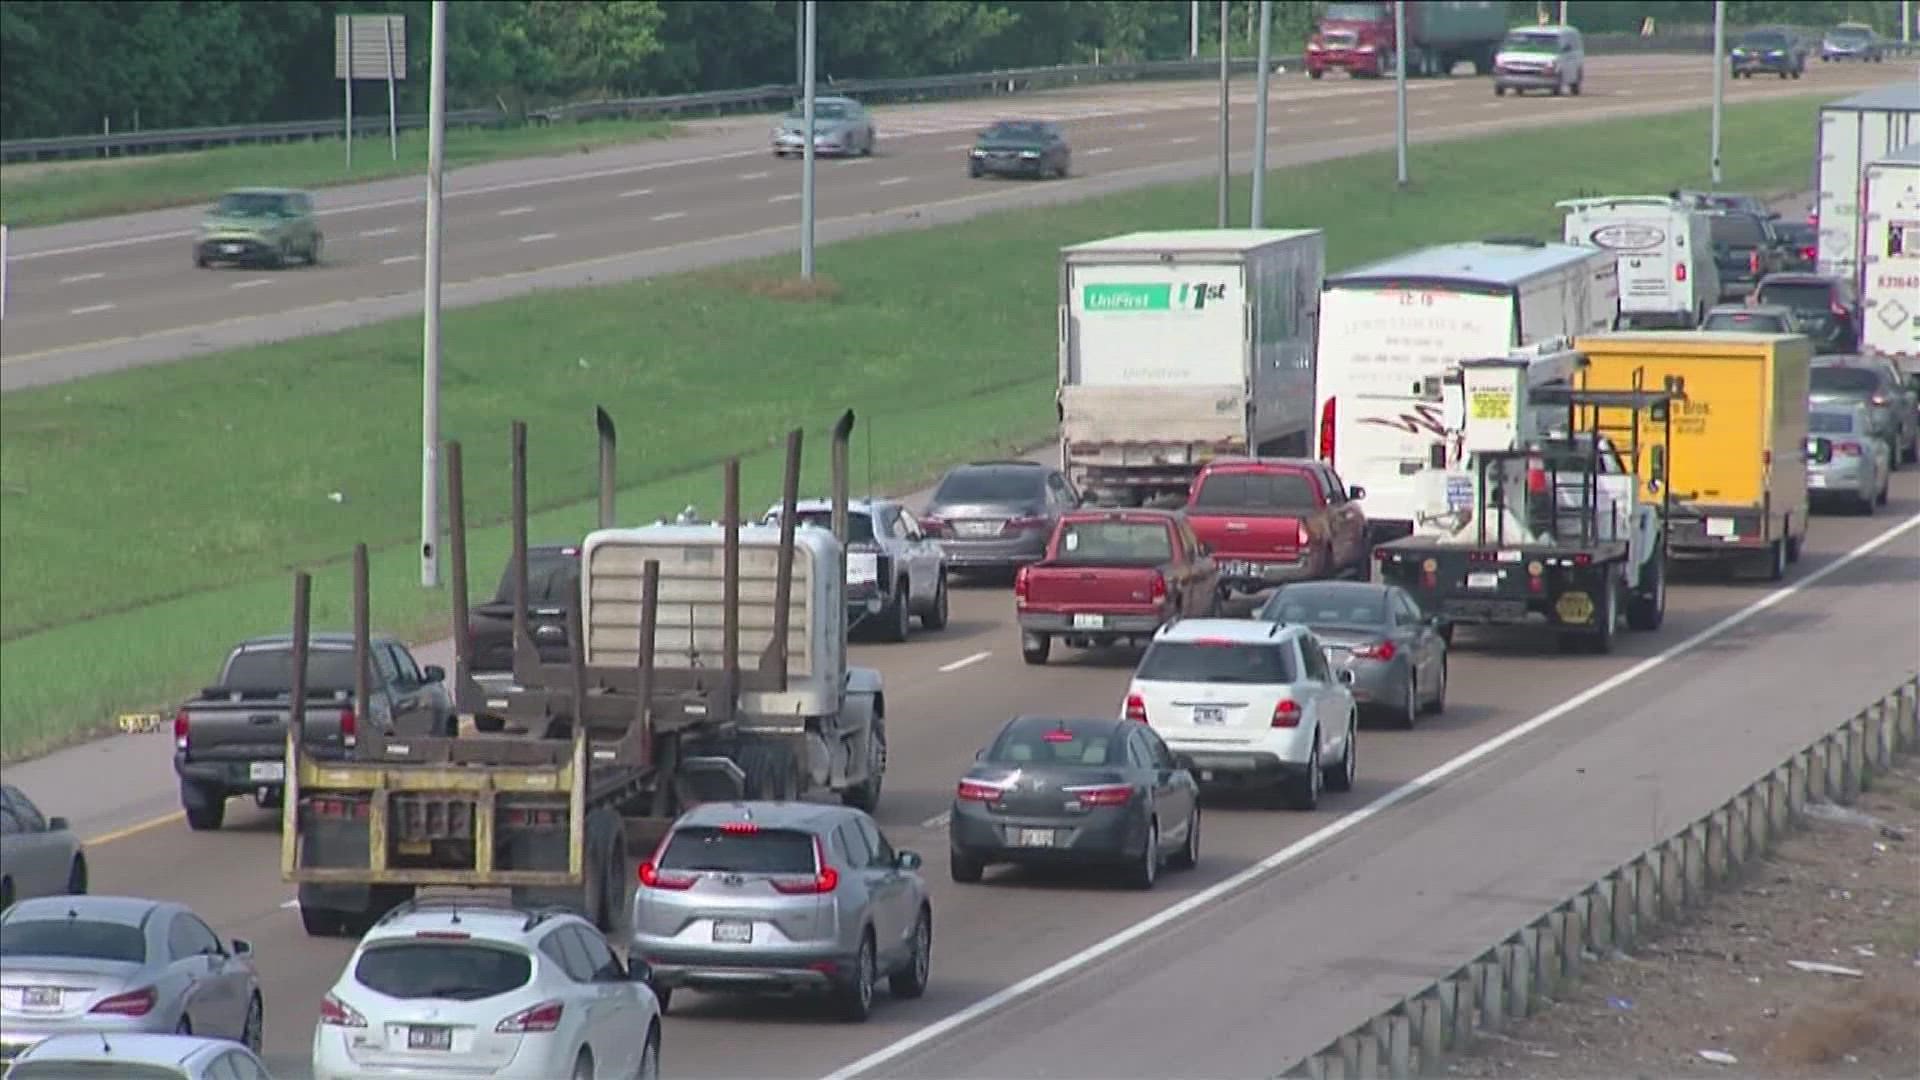 At 9:40 a.m., police said westbound lanes on I-240 have now reopened and traffic is moving through.